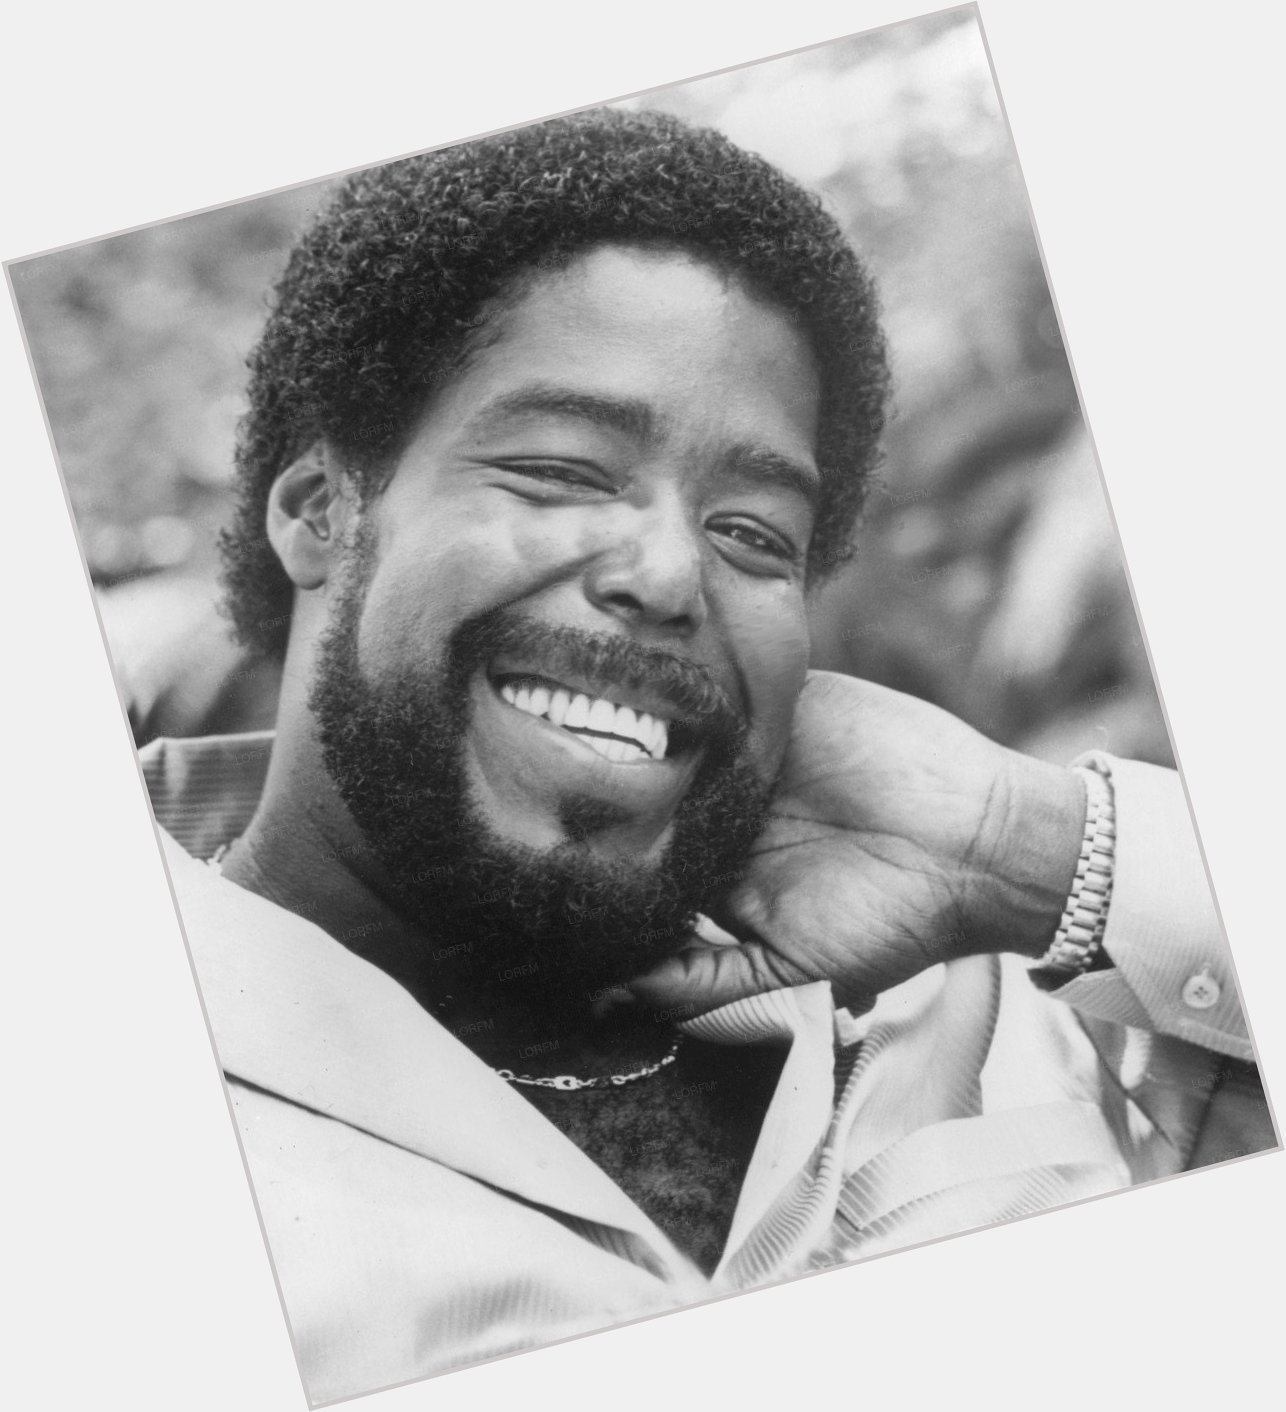 For you MG MHP 
Barry White Biography
Born Sept 12, 1944
 
Happy Birthday 